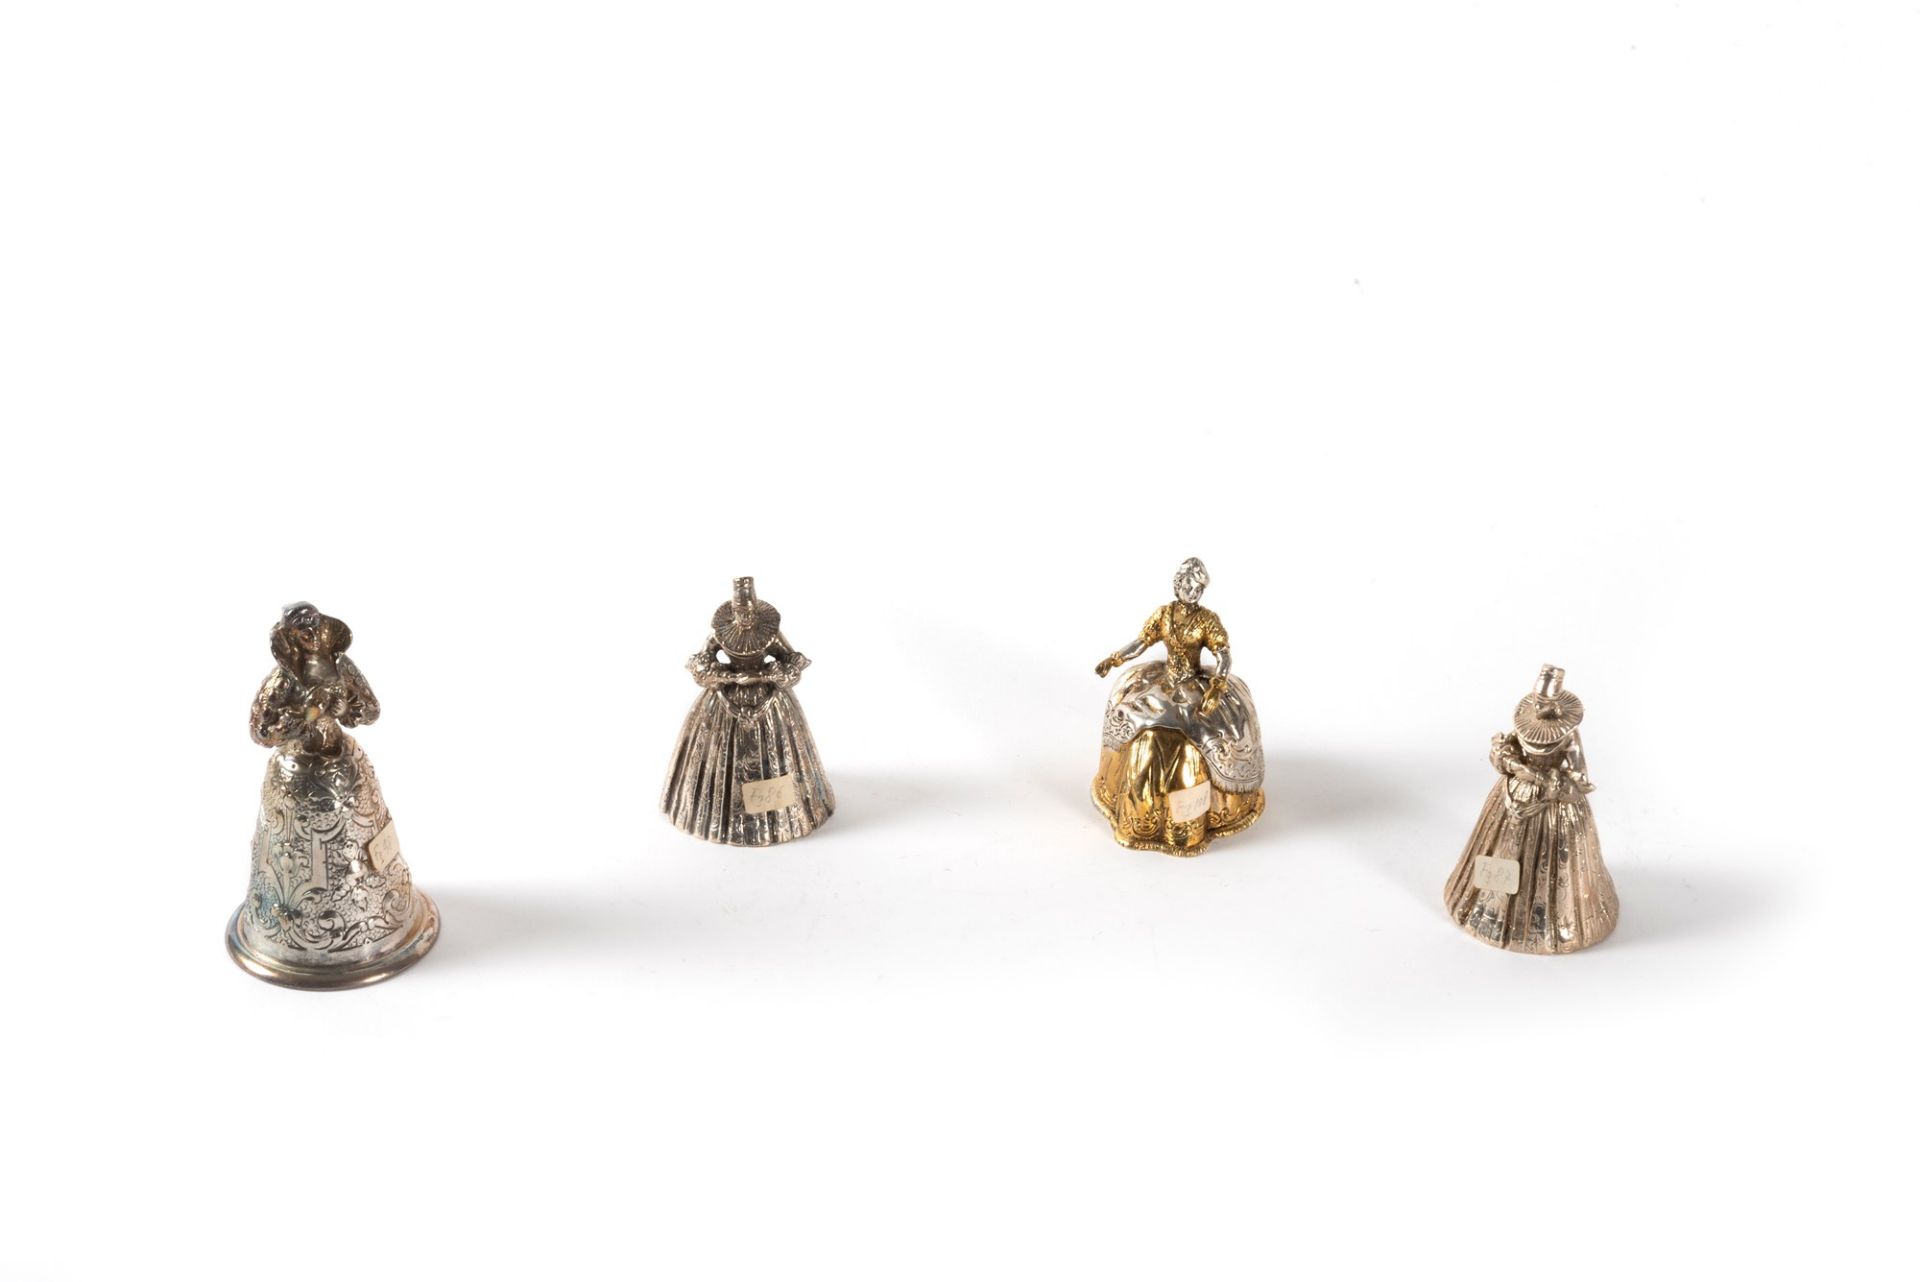 Lot consisting of four silver bells depicting female figures, 20th century